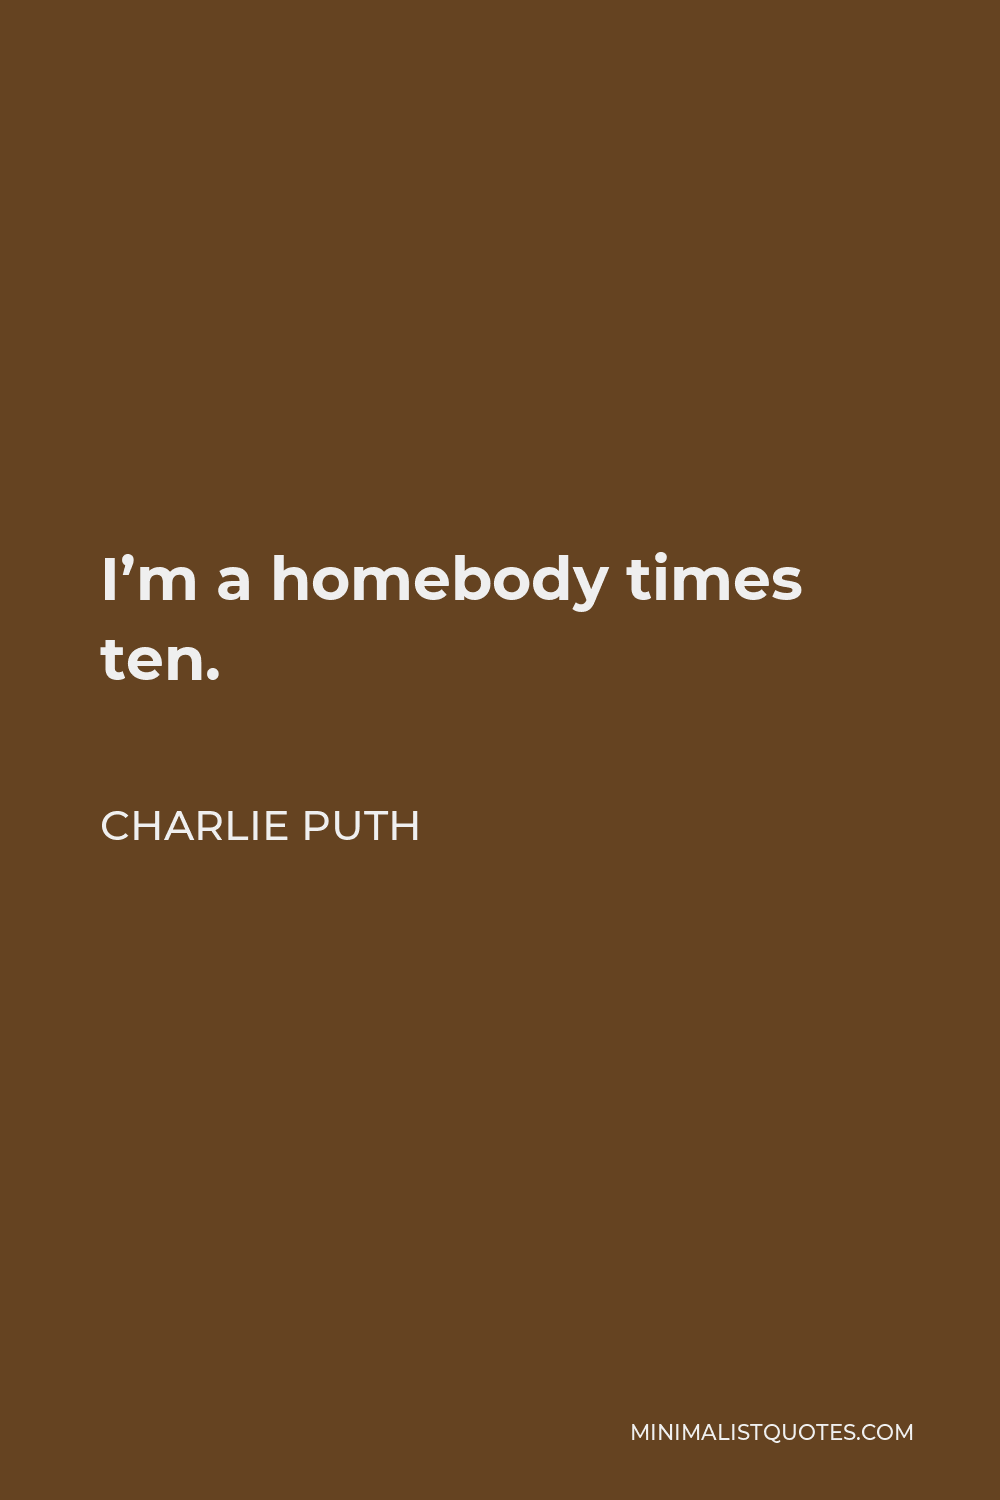 Charlie Puth Quote - I’m a homebody times ten.